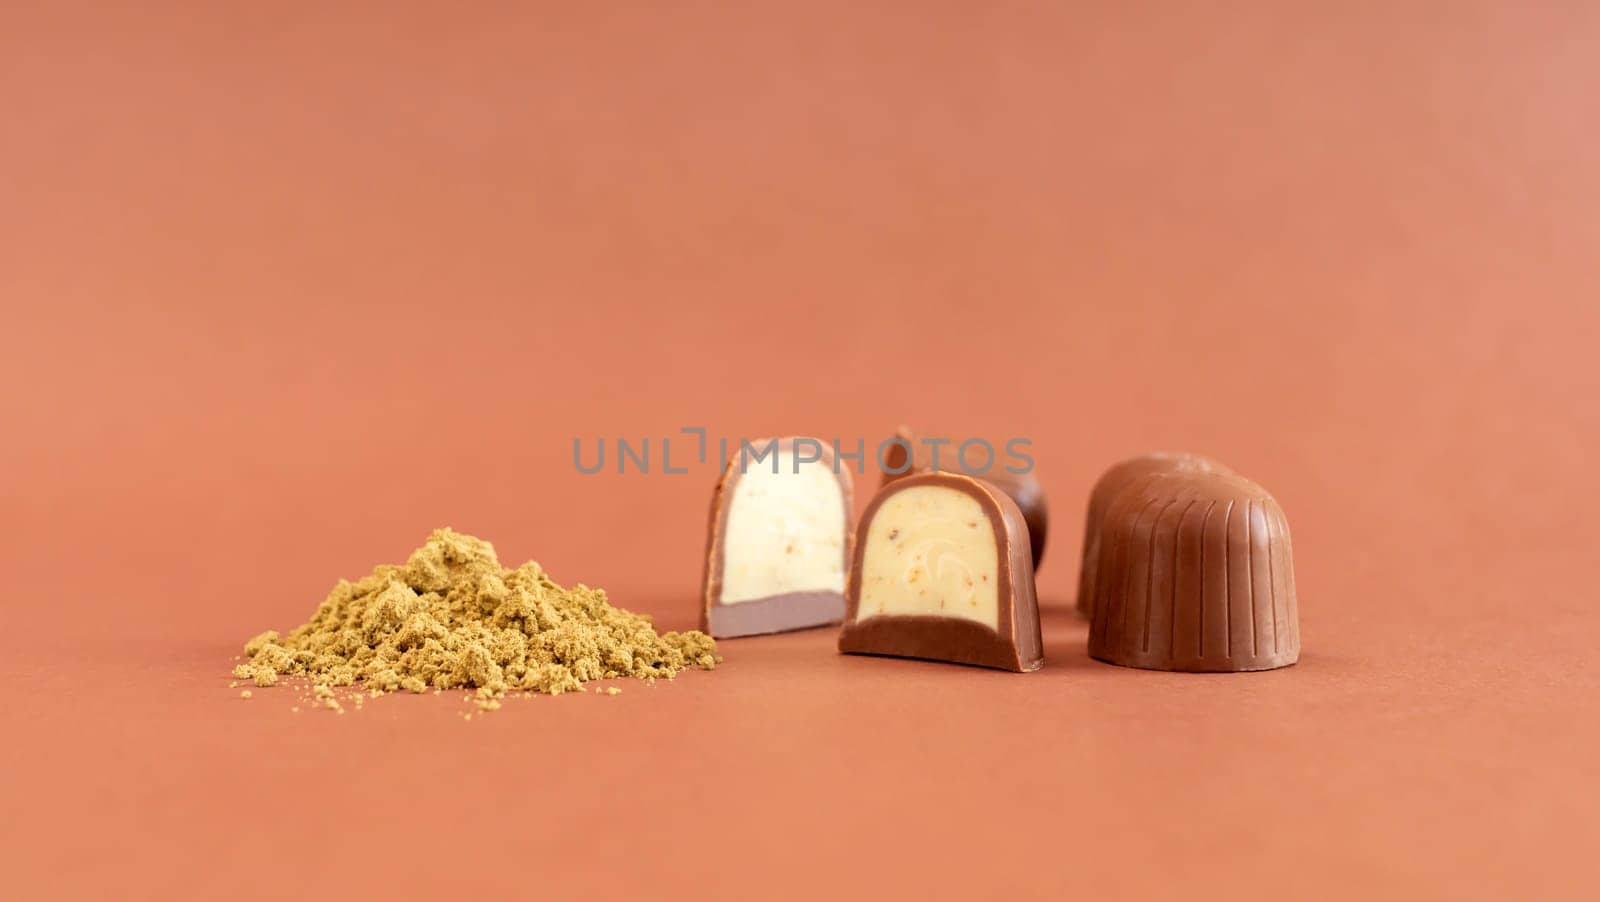 Mockup Brown Cannabis Chocolate Sweets And Green Hemp Protein Powder On Brown Background. Horizontal Plane. Copy Space For Text. Template Healthy Snack. by netatsi